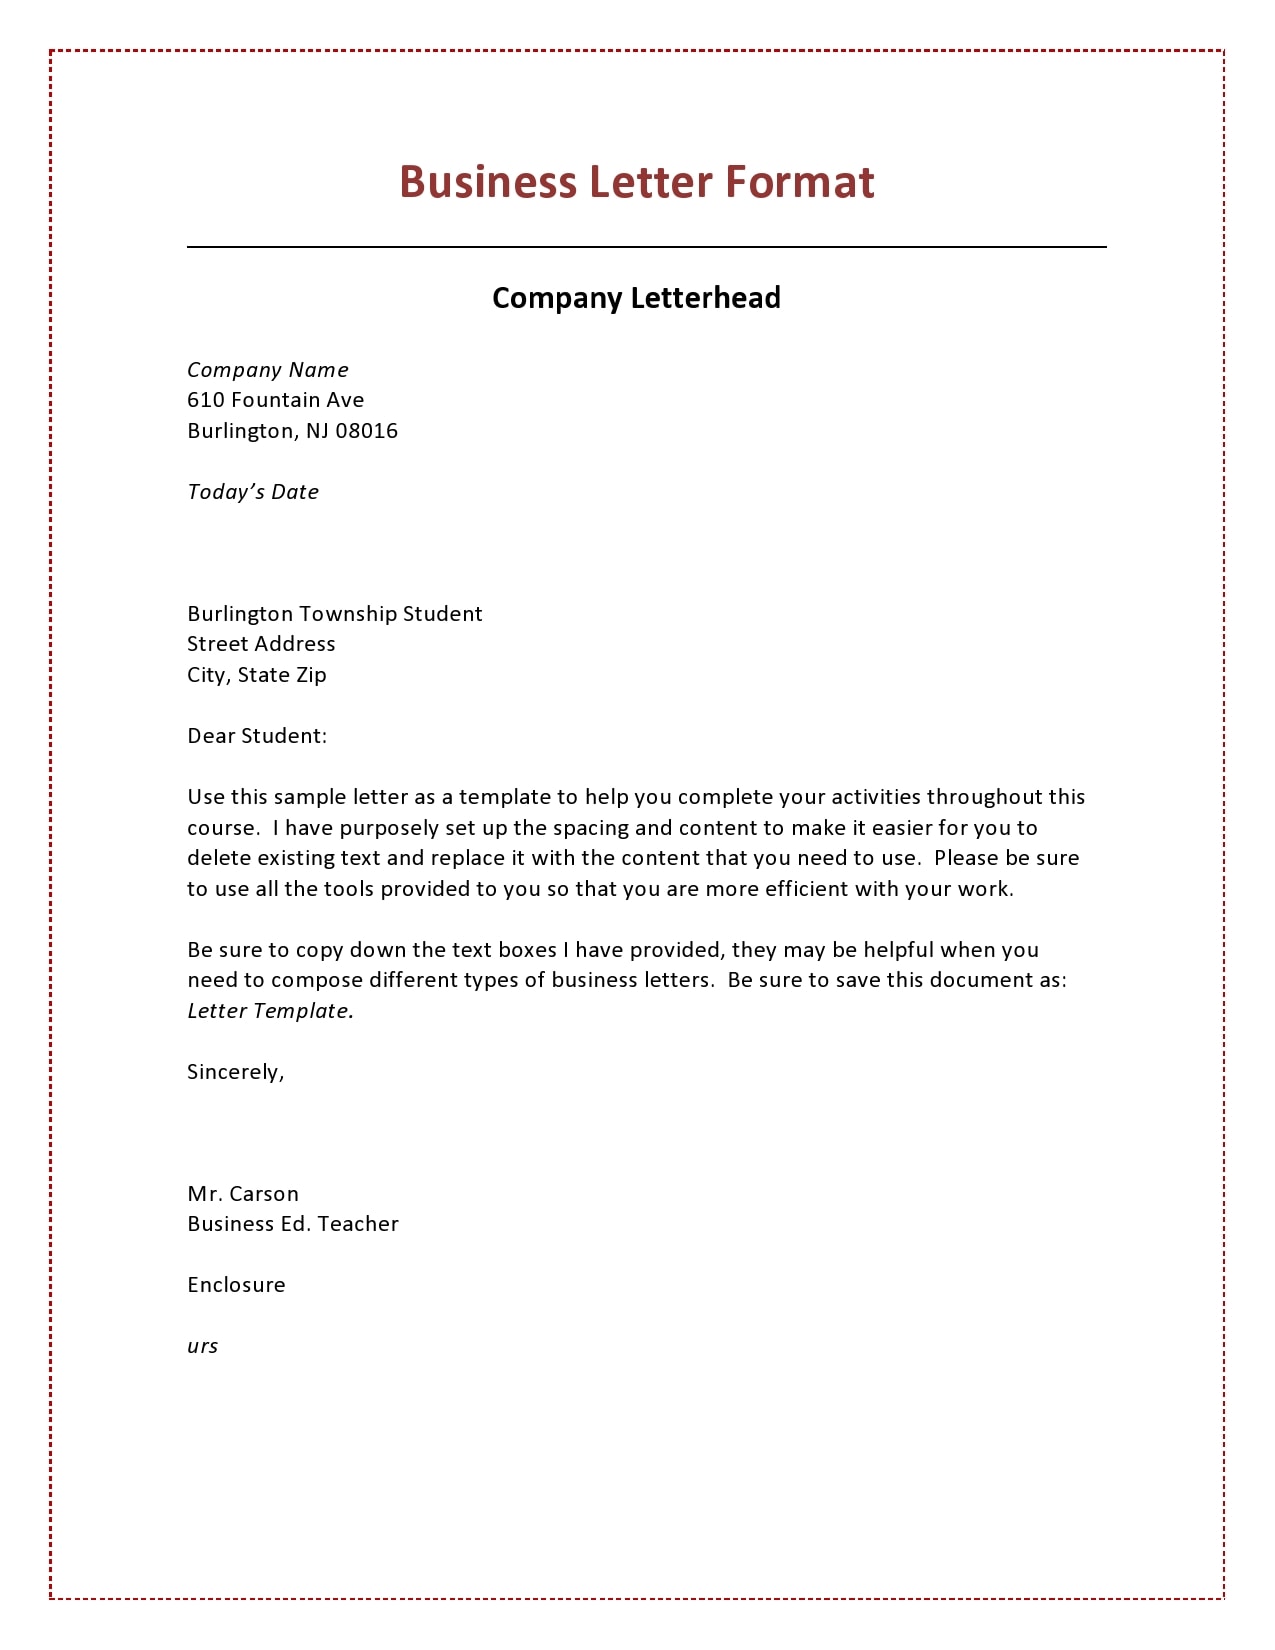 Free Model Business Letters